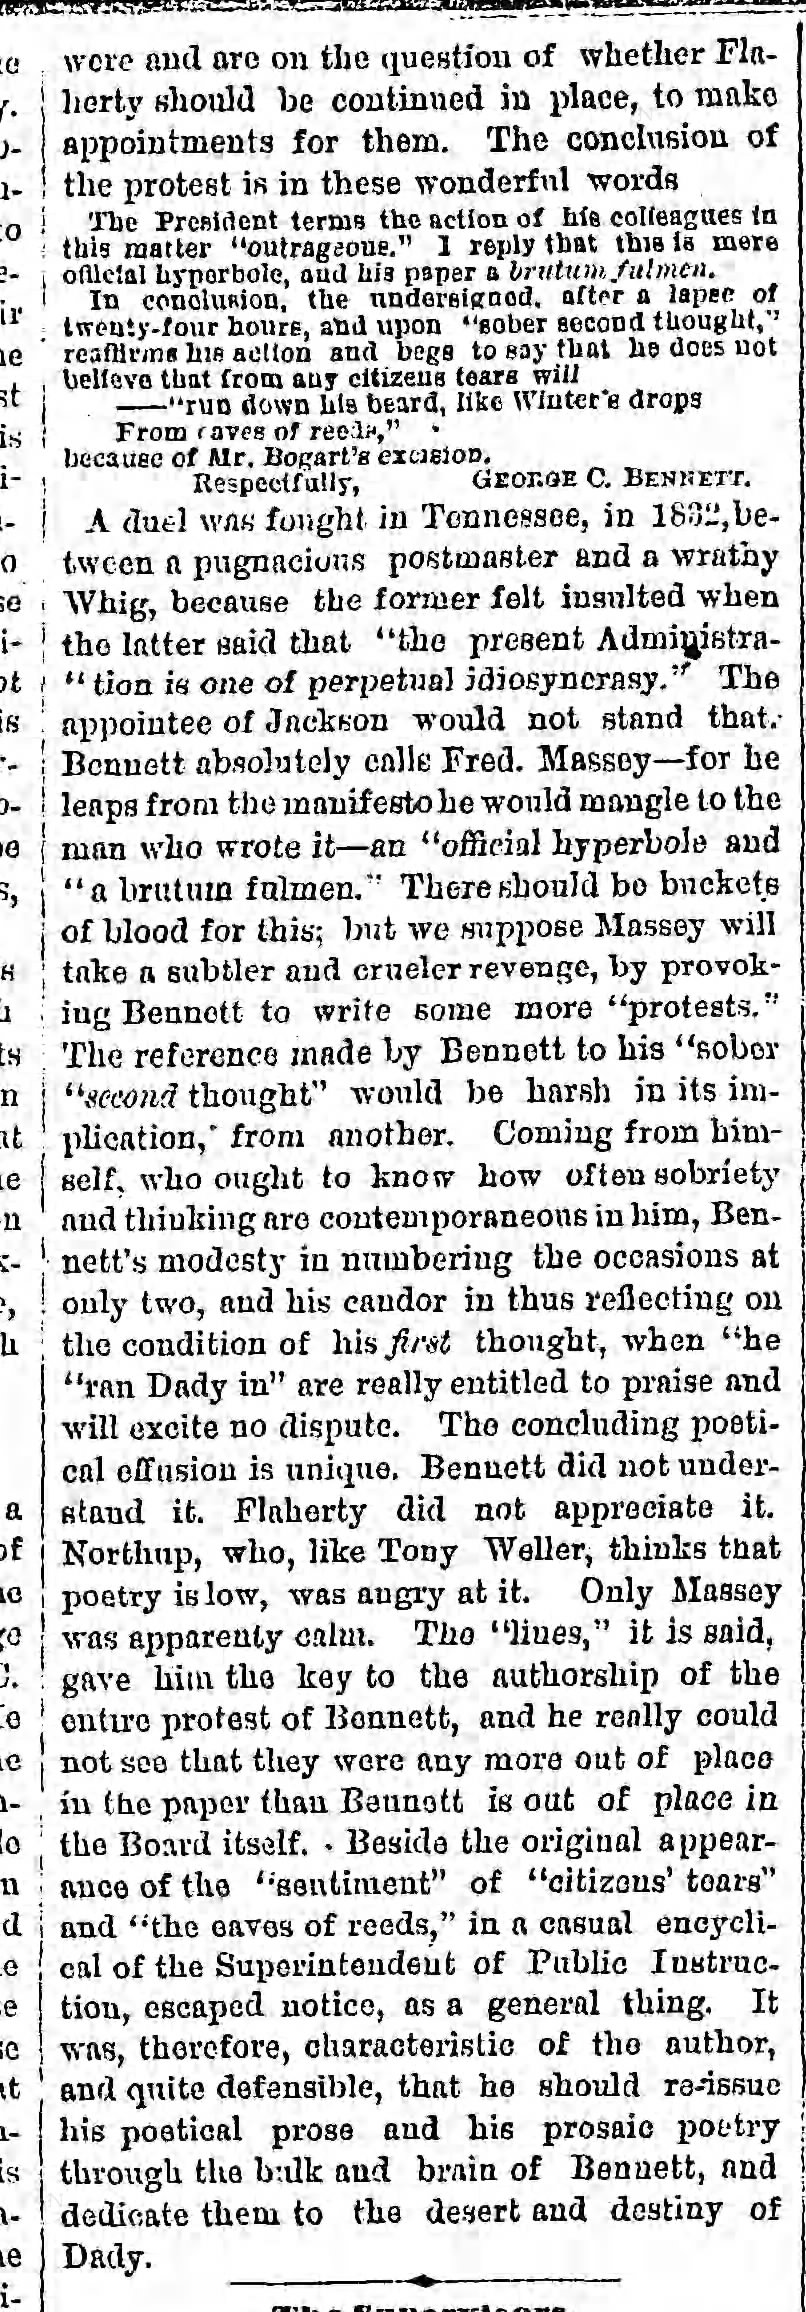 Friday, February 1878, Page 2 2 of 2